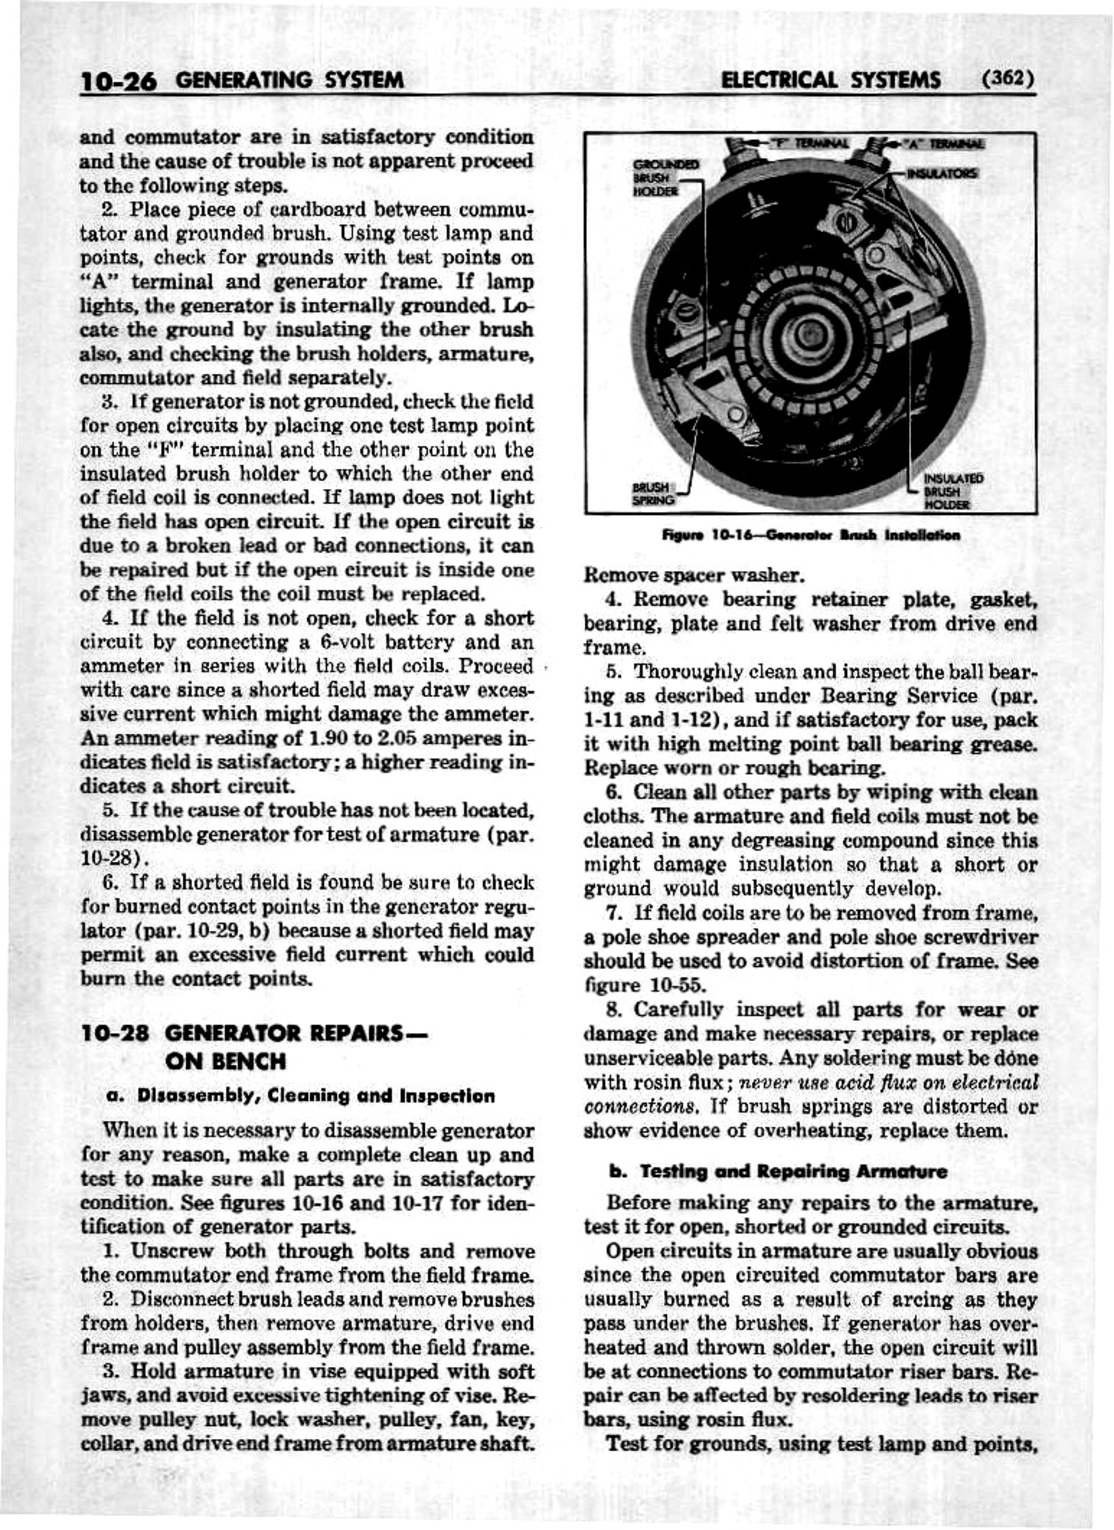 n_11 1952 Buick Shop Manual - Electrical Systems-026-026.jpg